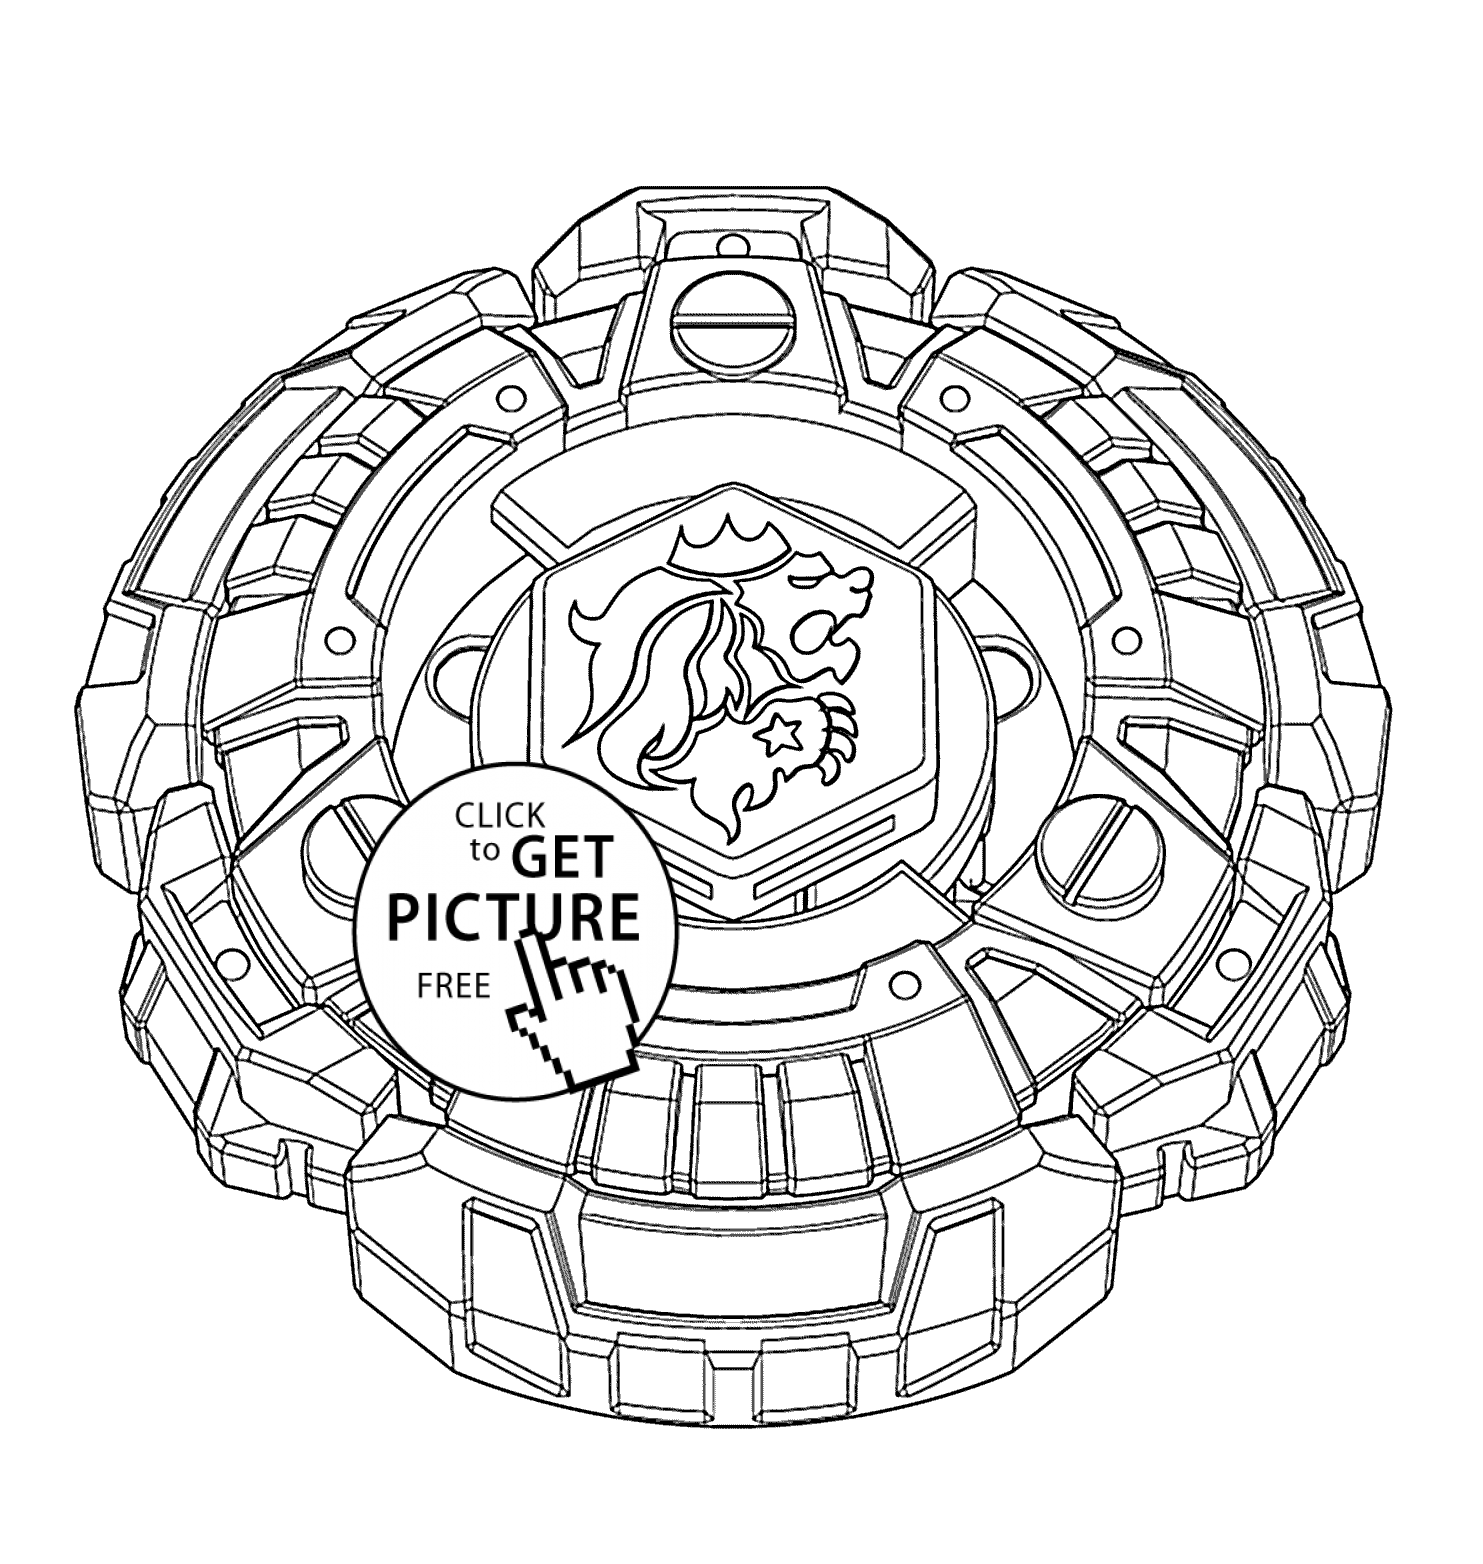 Coloring Pages For Kids Beyblade - coloring pages